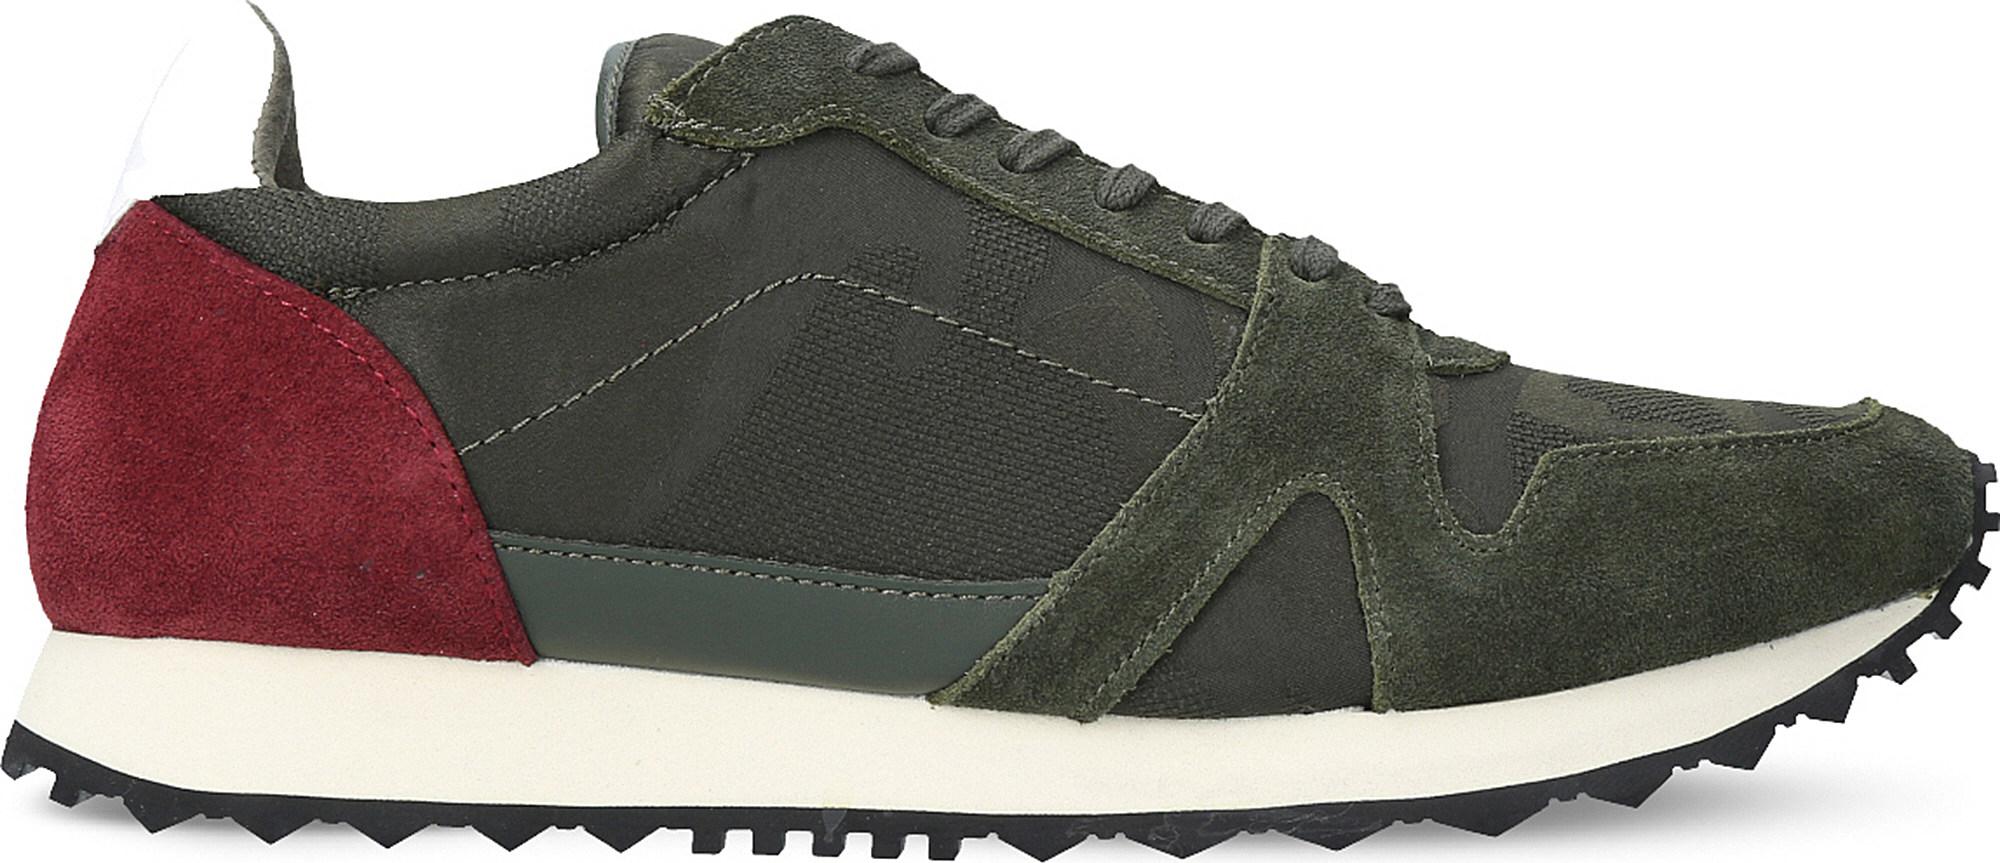 Kurt Geiger Lamont Suede Low-top Trainers in Green for Men - Lyst